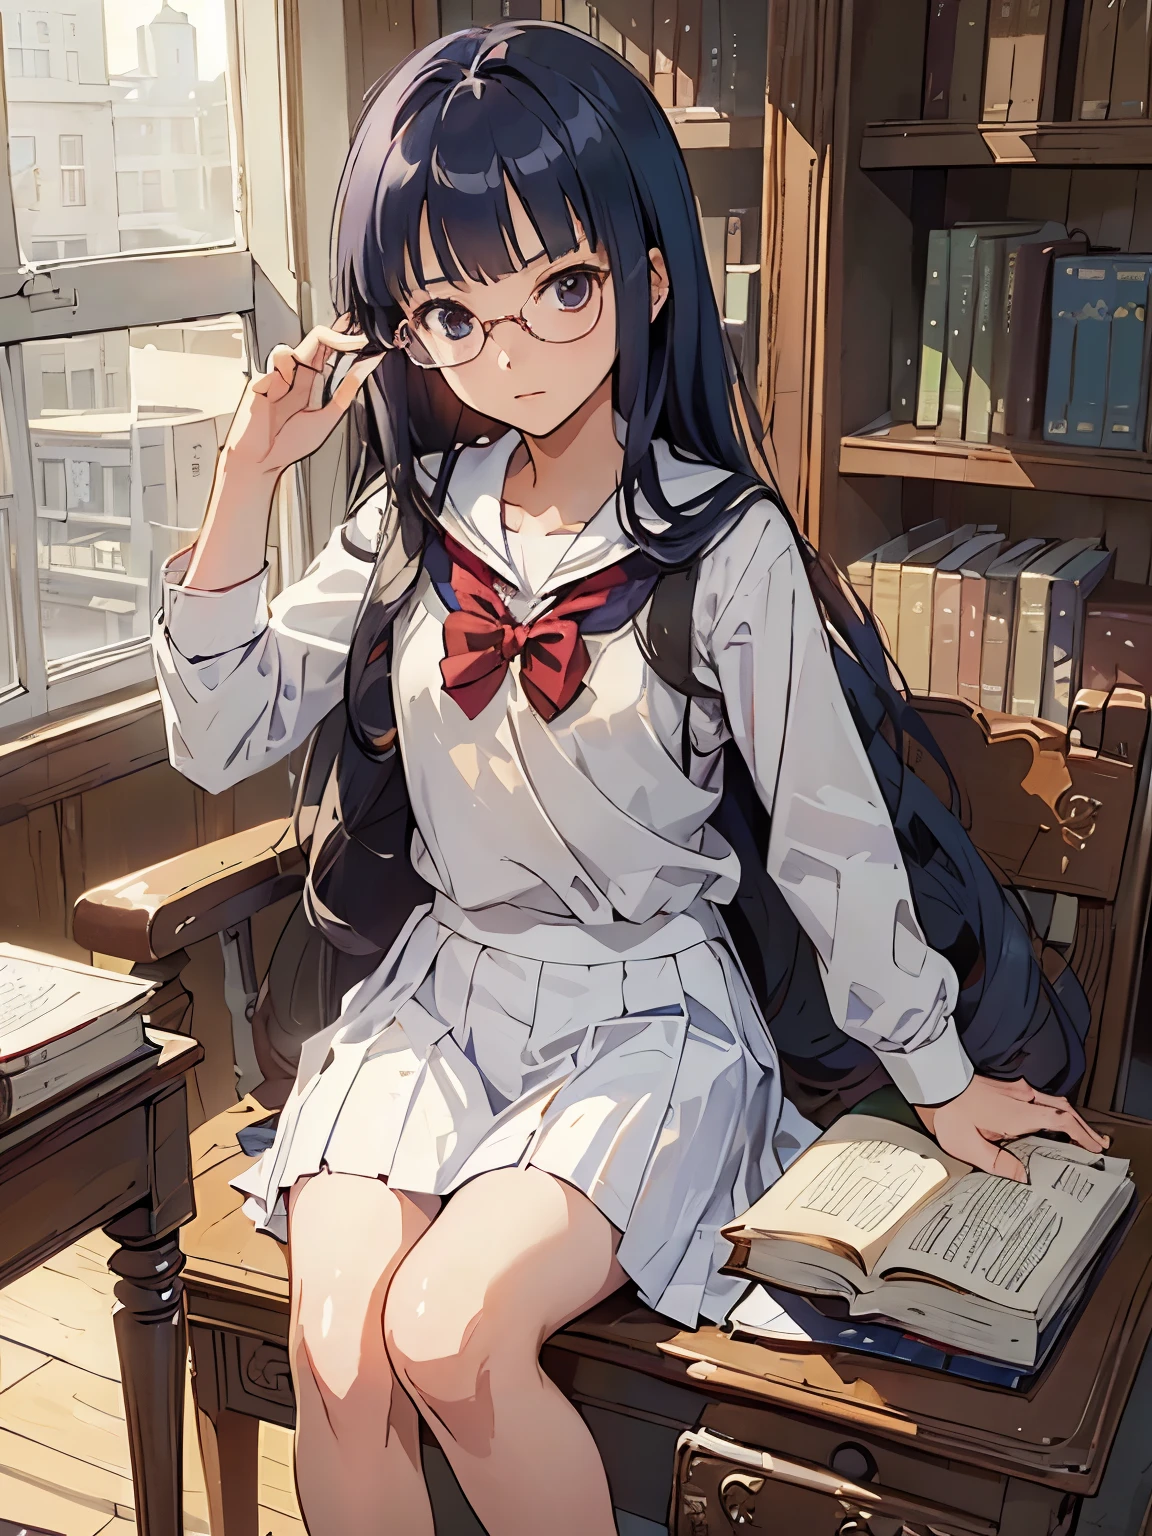 (((masterpiece))) ((( background : romantic theme : students : in library : books ))) ((( character : Kanna : fit body : long smart hair  : model student : nerd : wearing glasses : summer white  : sitting : serious studying )